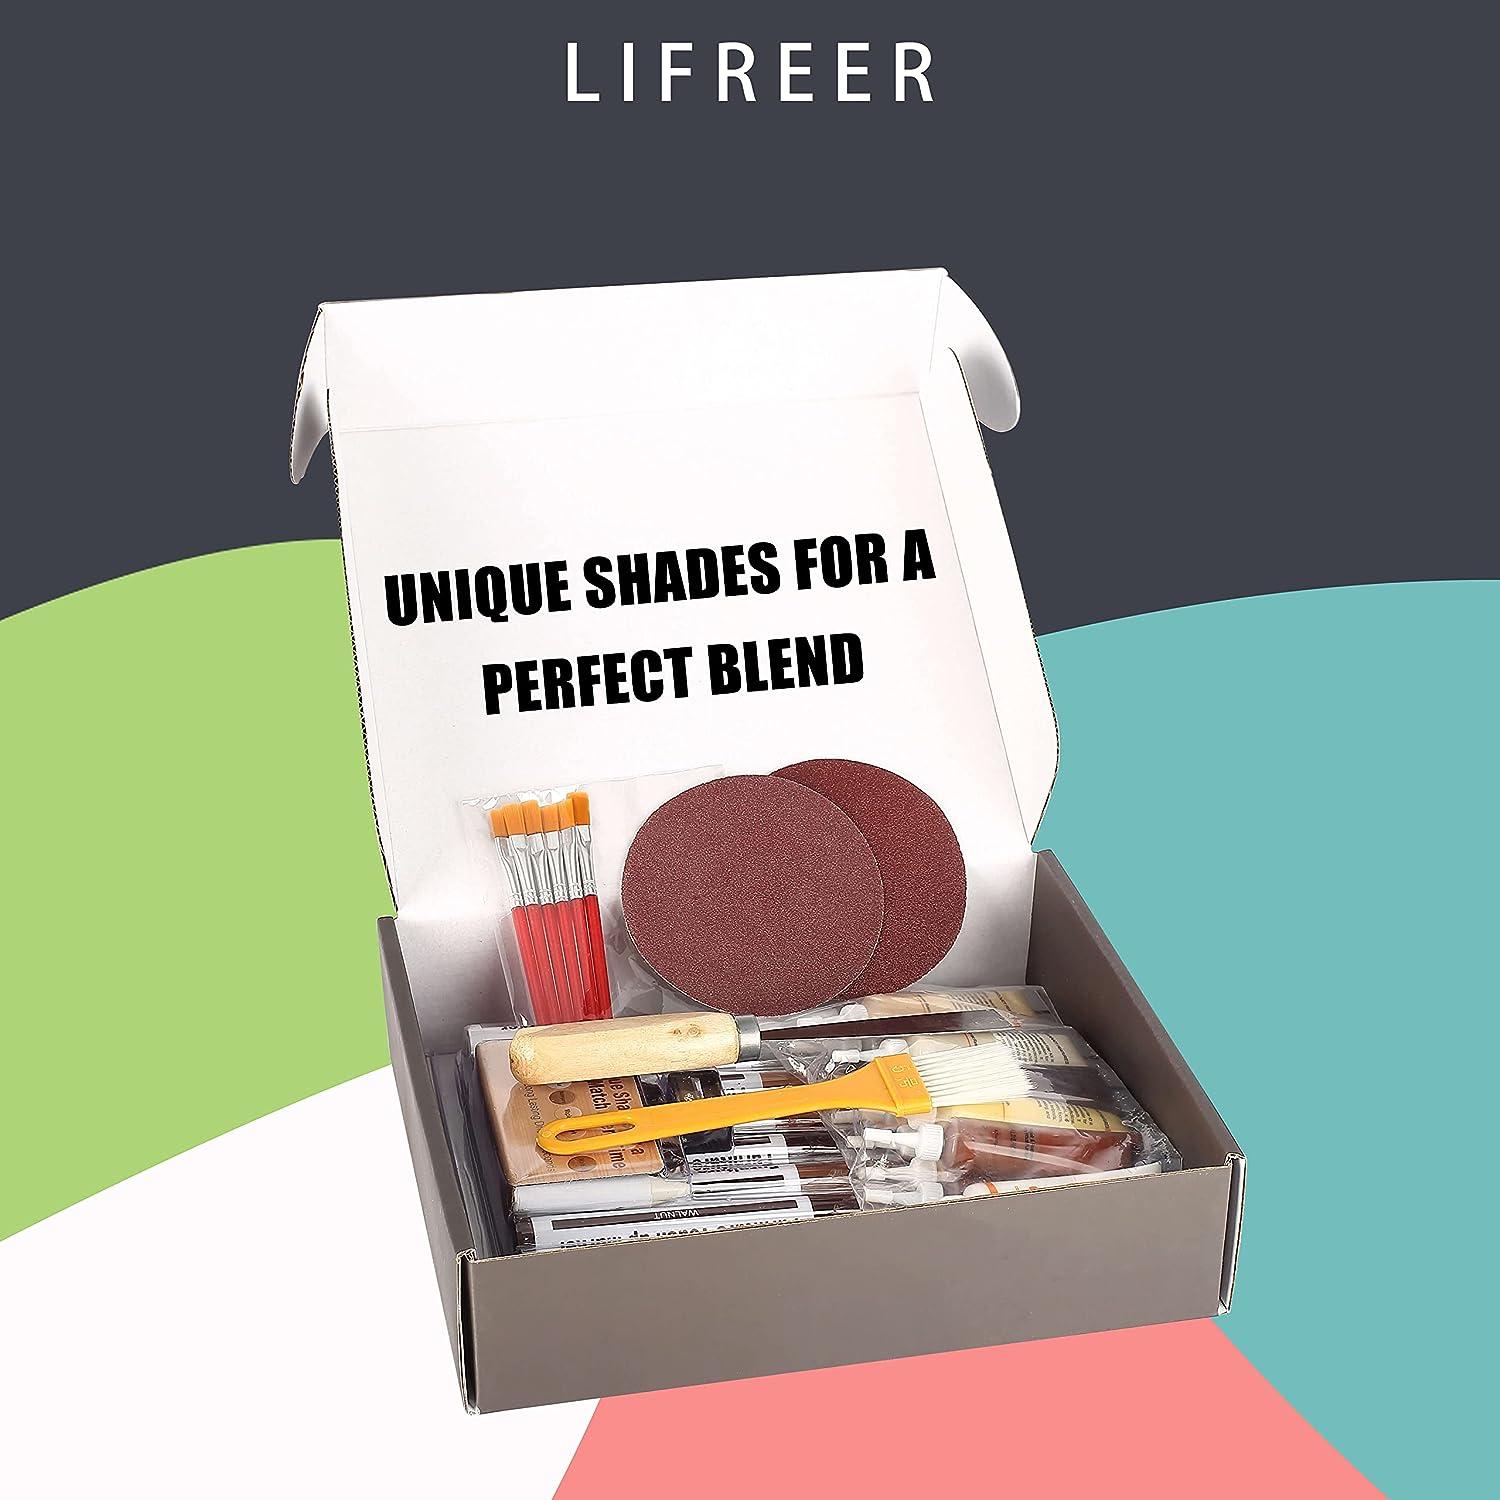 Lifreer Wood Furniture Repair Kit, High-Performance Wood Filler, Wood Putty  With Beeswax